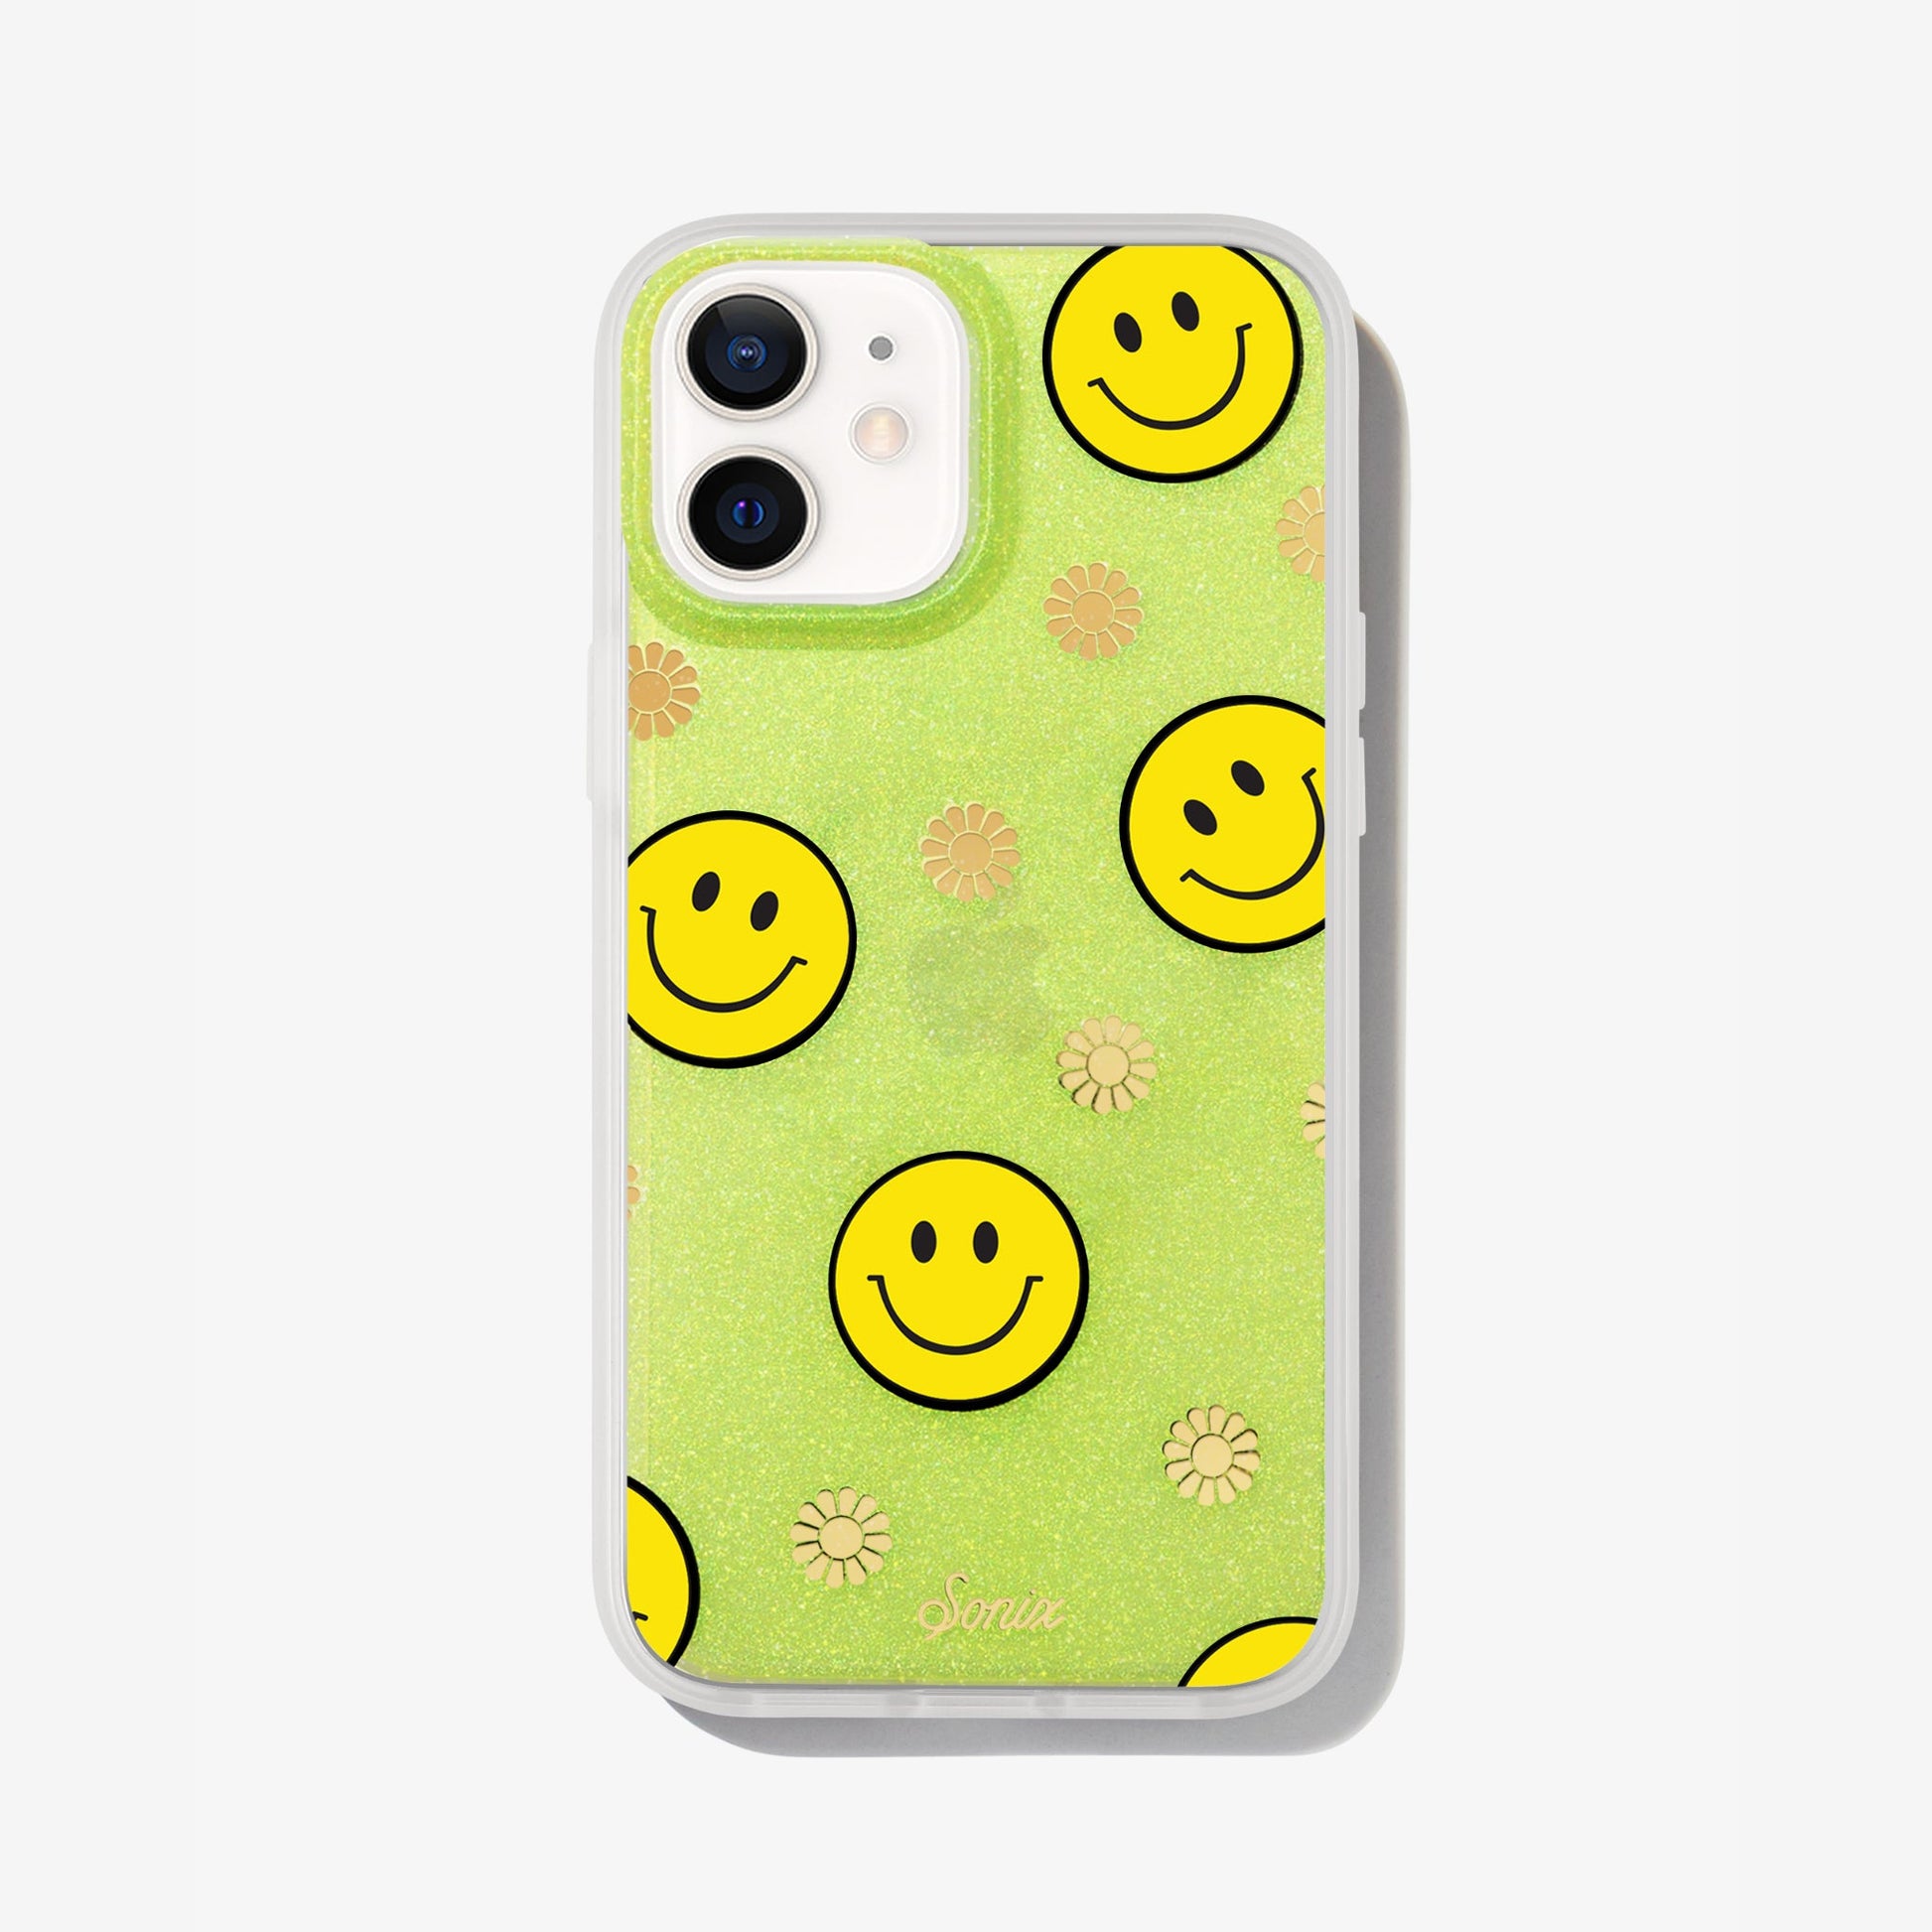 The clear yellow case infused with iridescent glitter features happy faces and signature gold foil flowers shown on an iphone 12